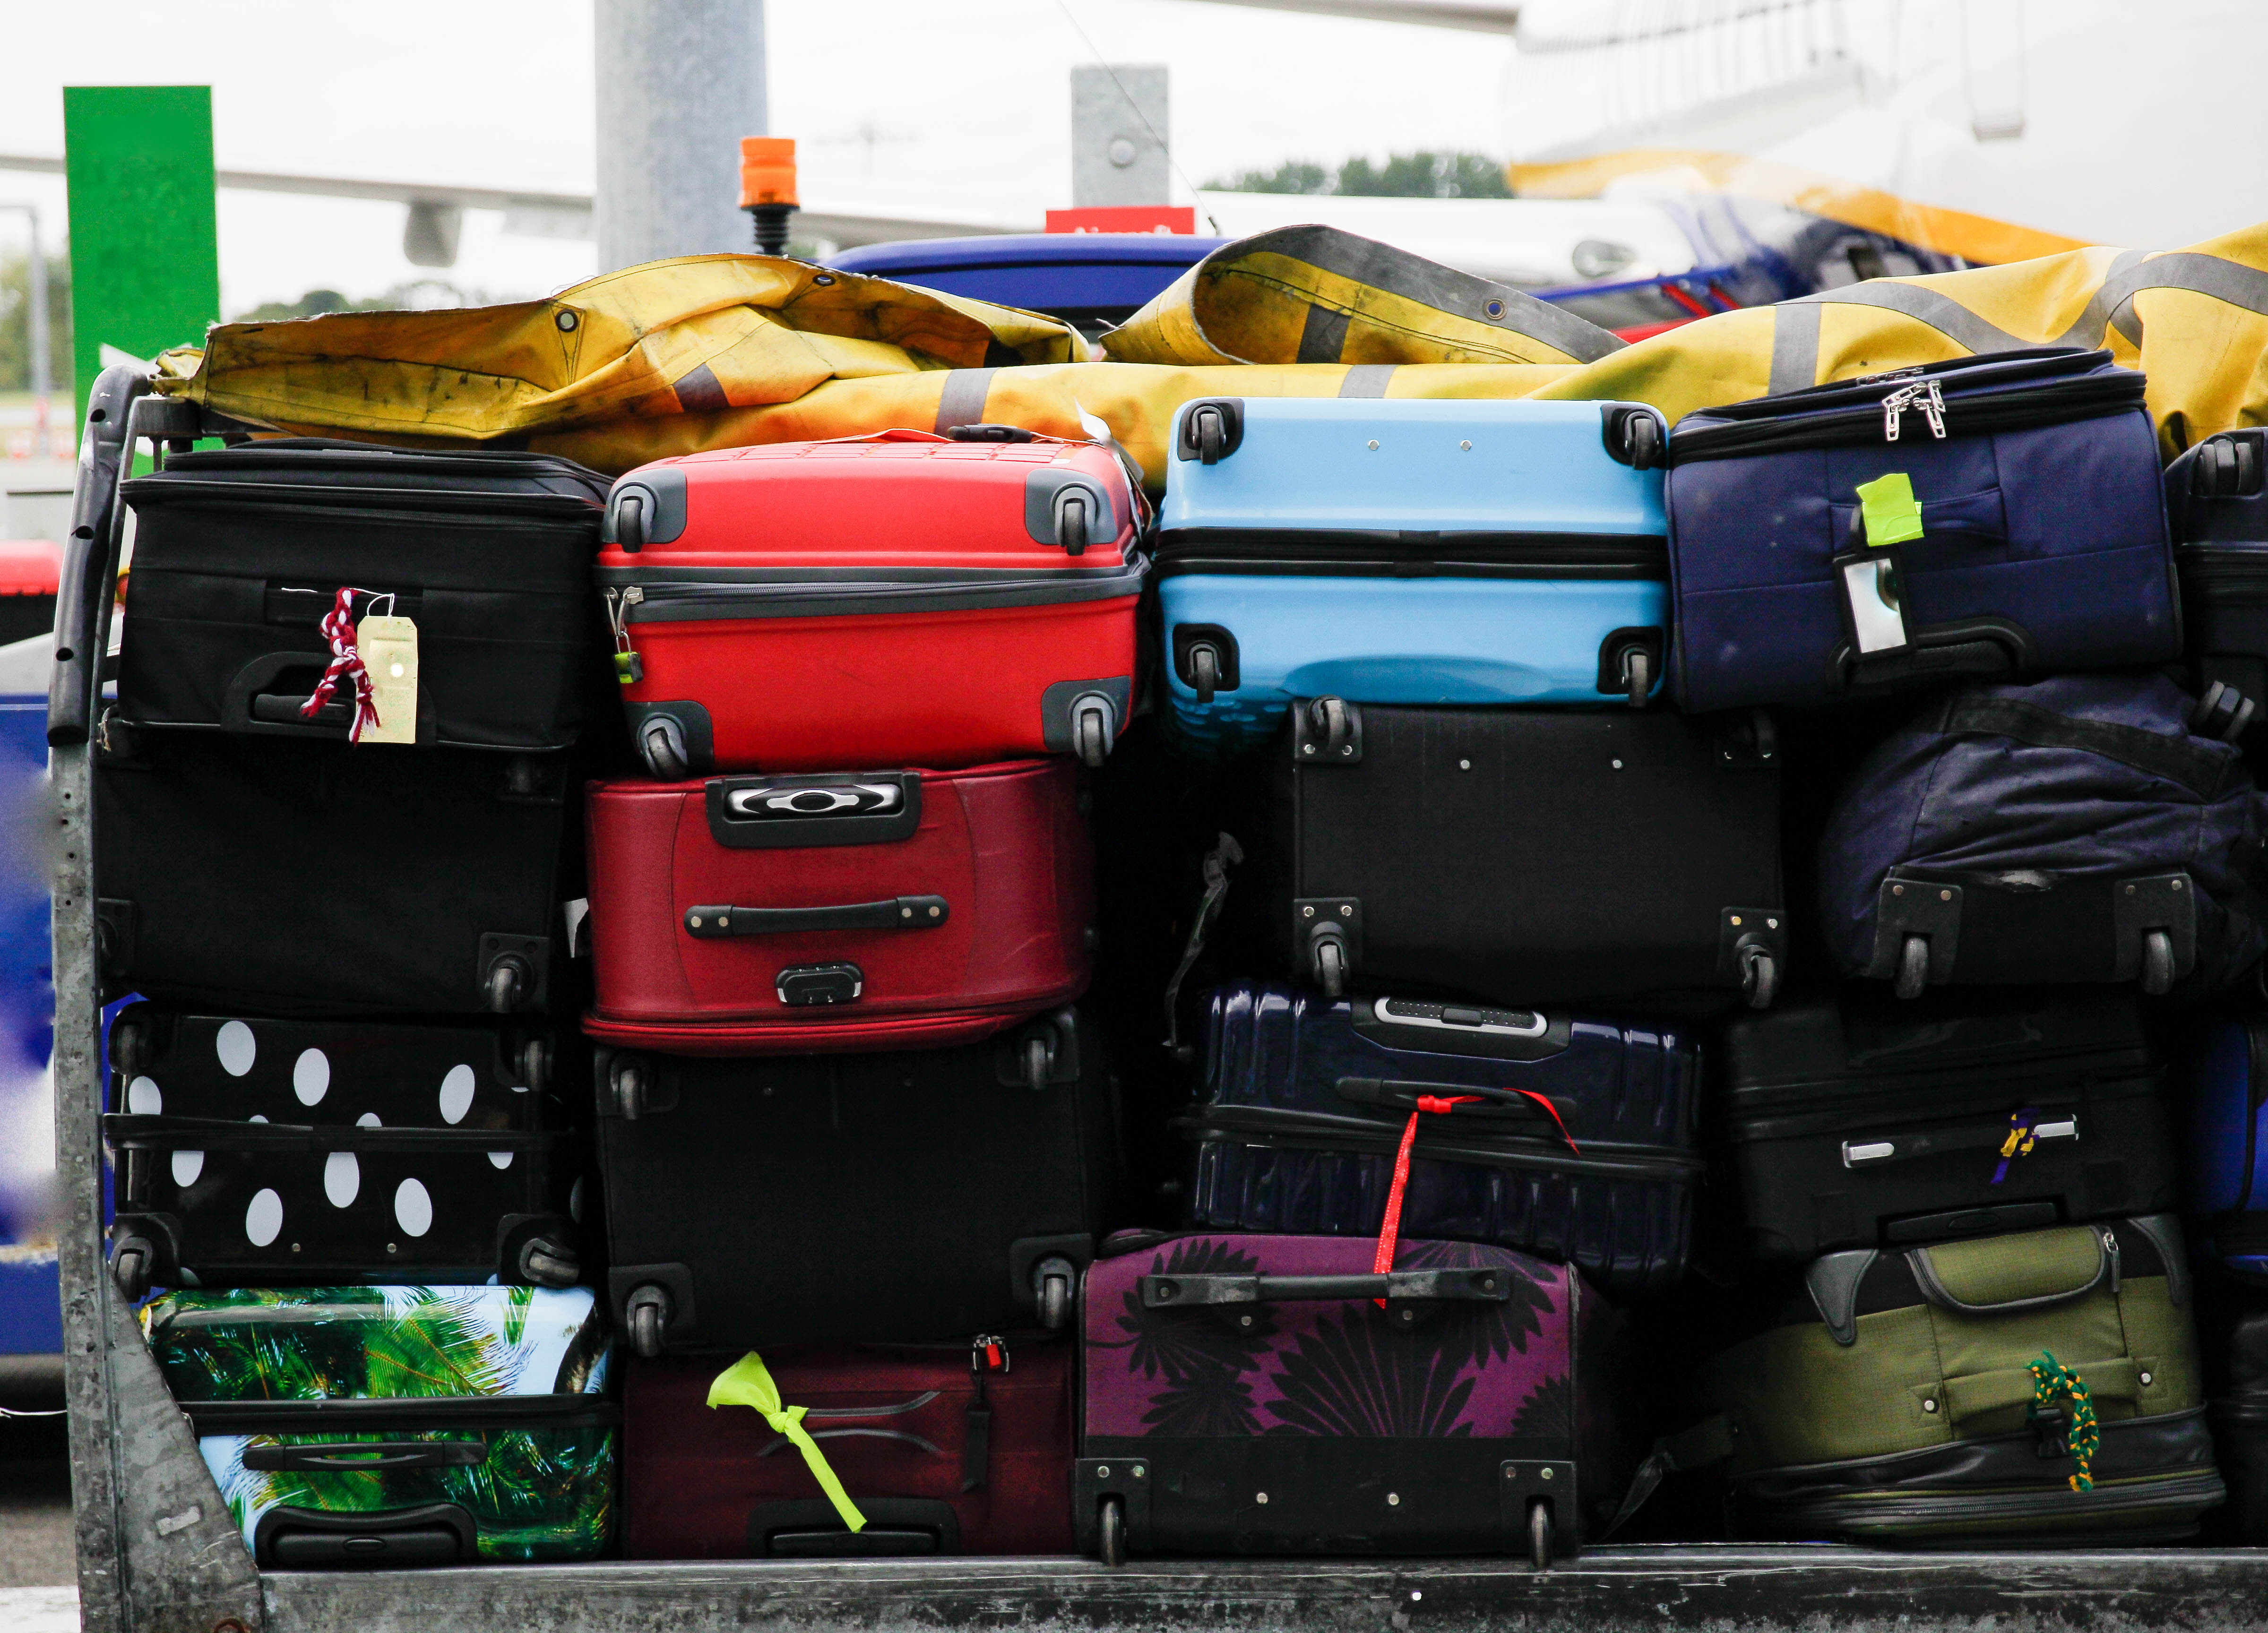 More Airlines Are Losing Luggage. AirTags and Tile Trackers Can